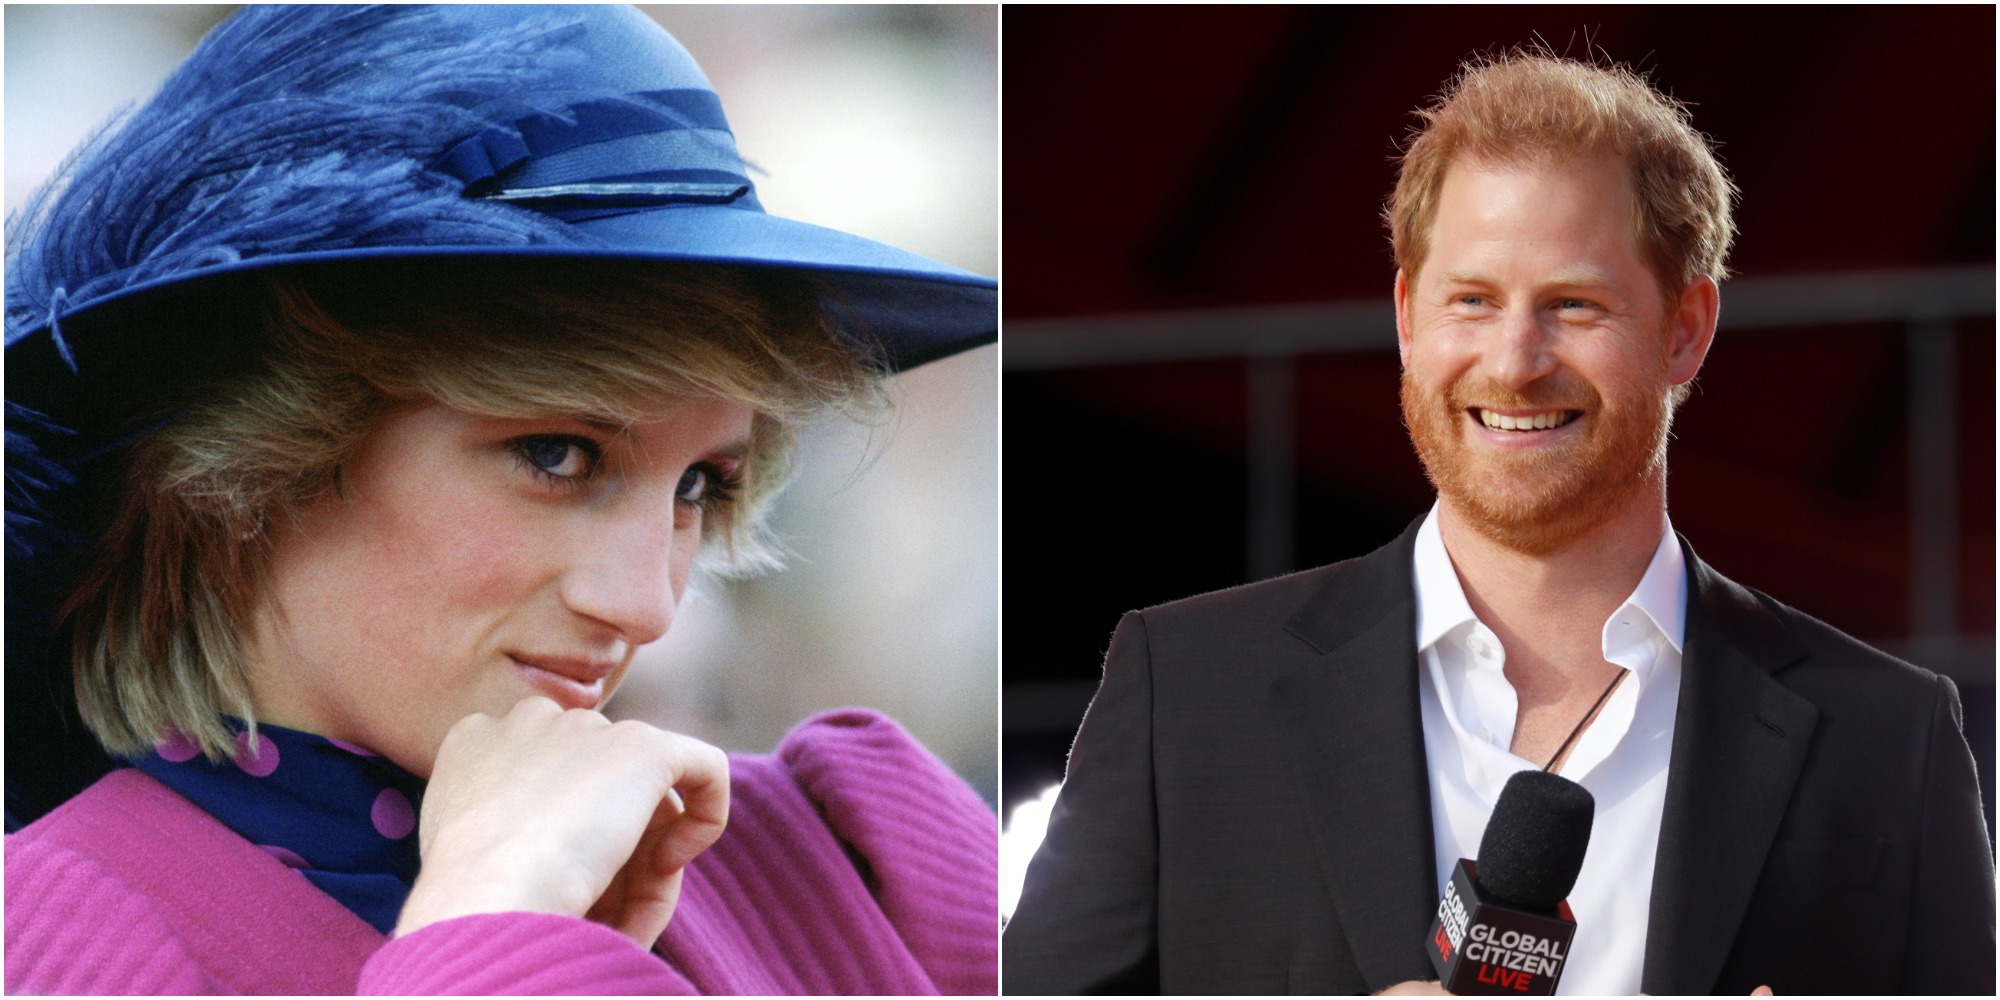 Princess Diana and Prince Harry in side-by-side images.